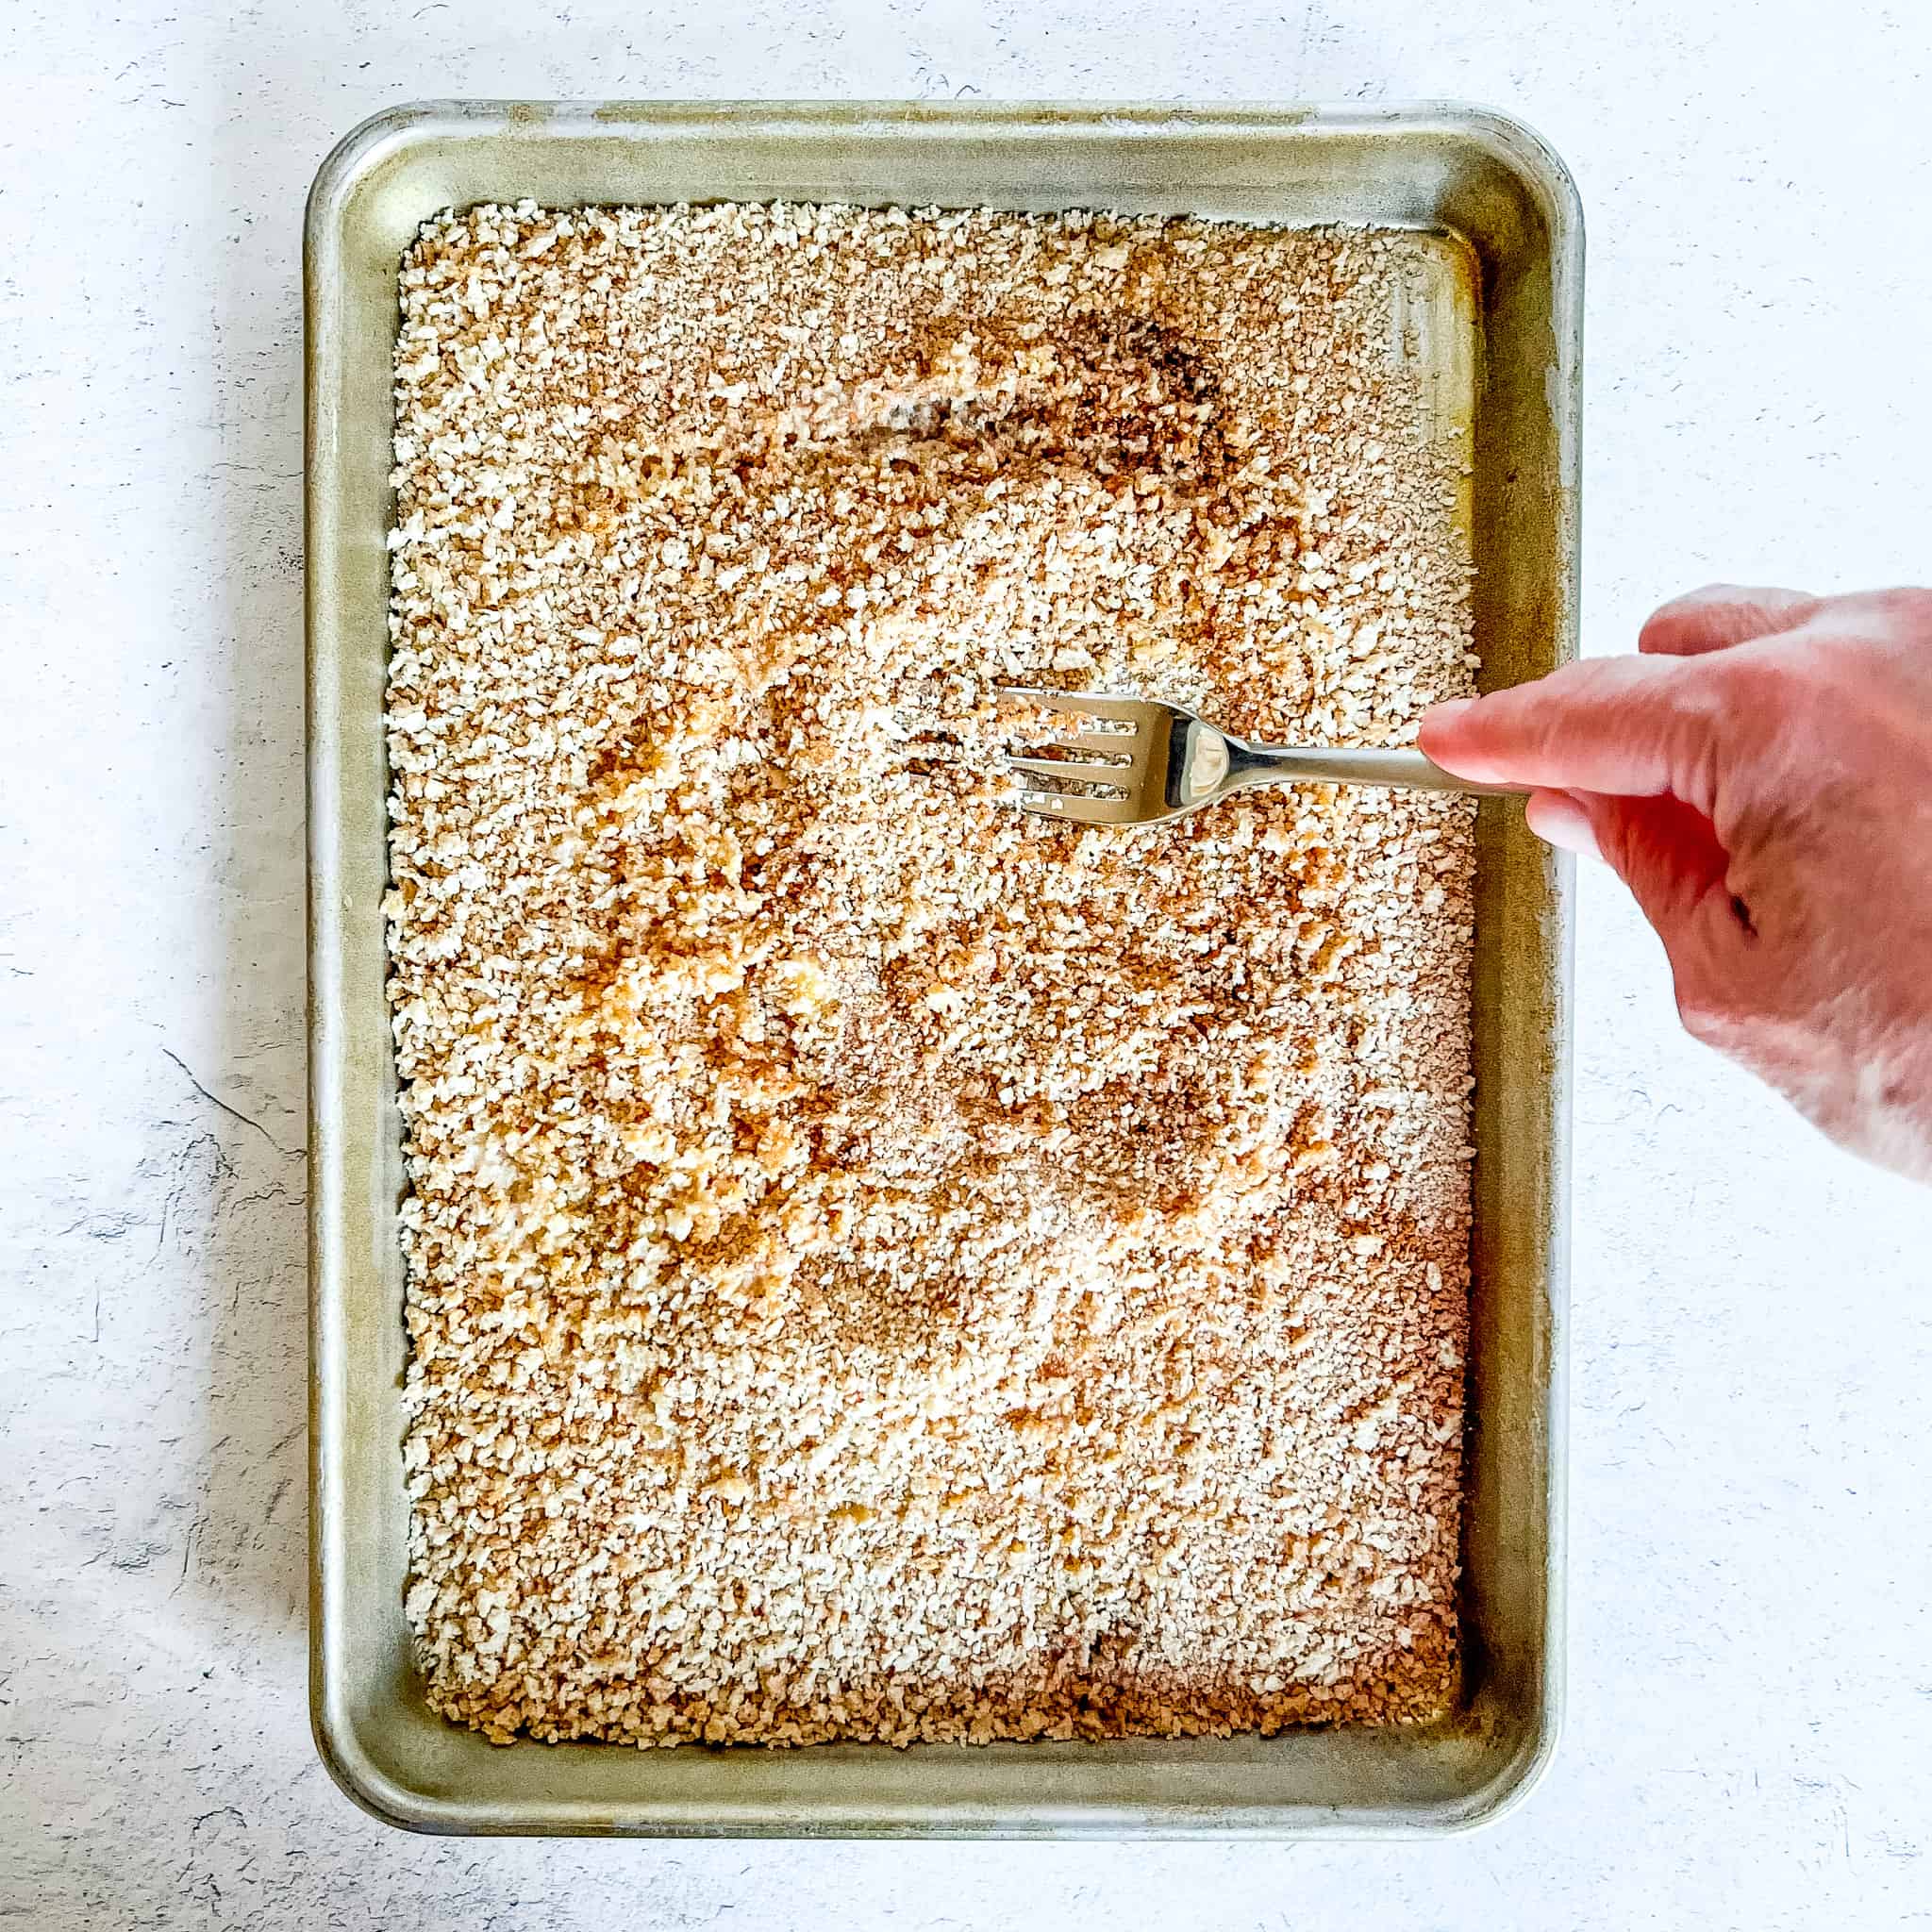 Mixing melted butter into cinnamon panko crumbs.